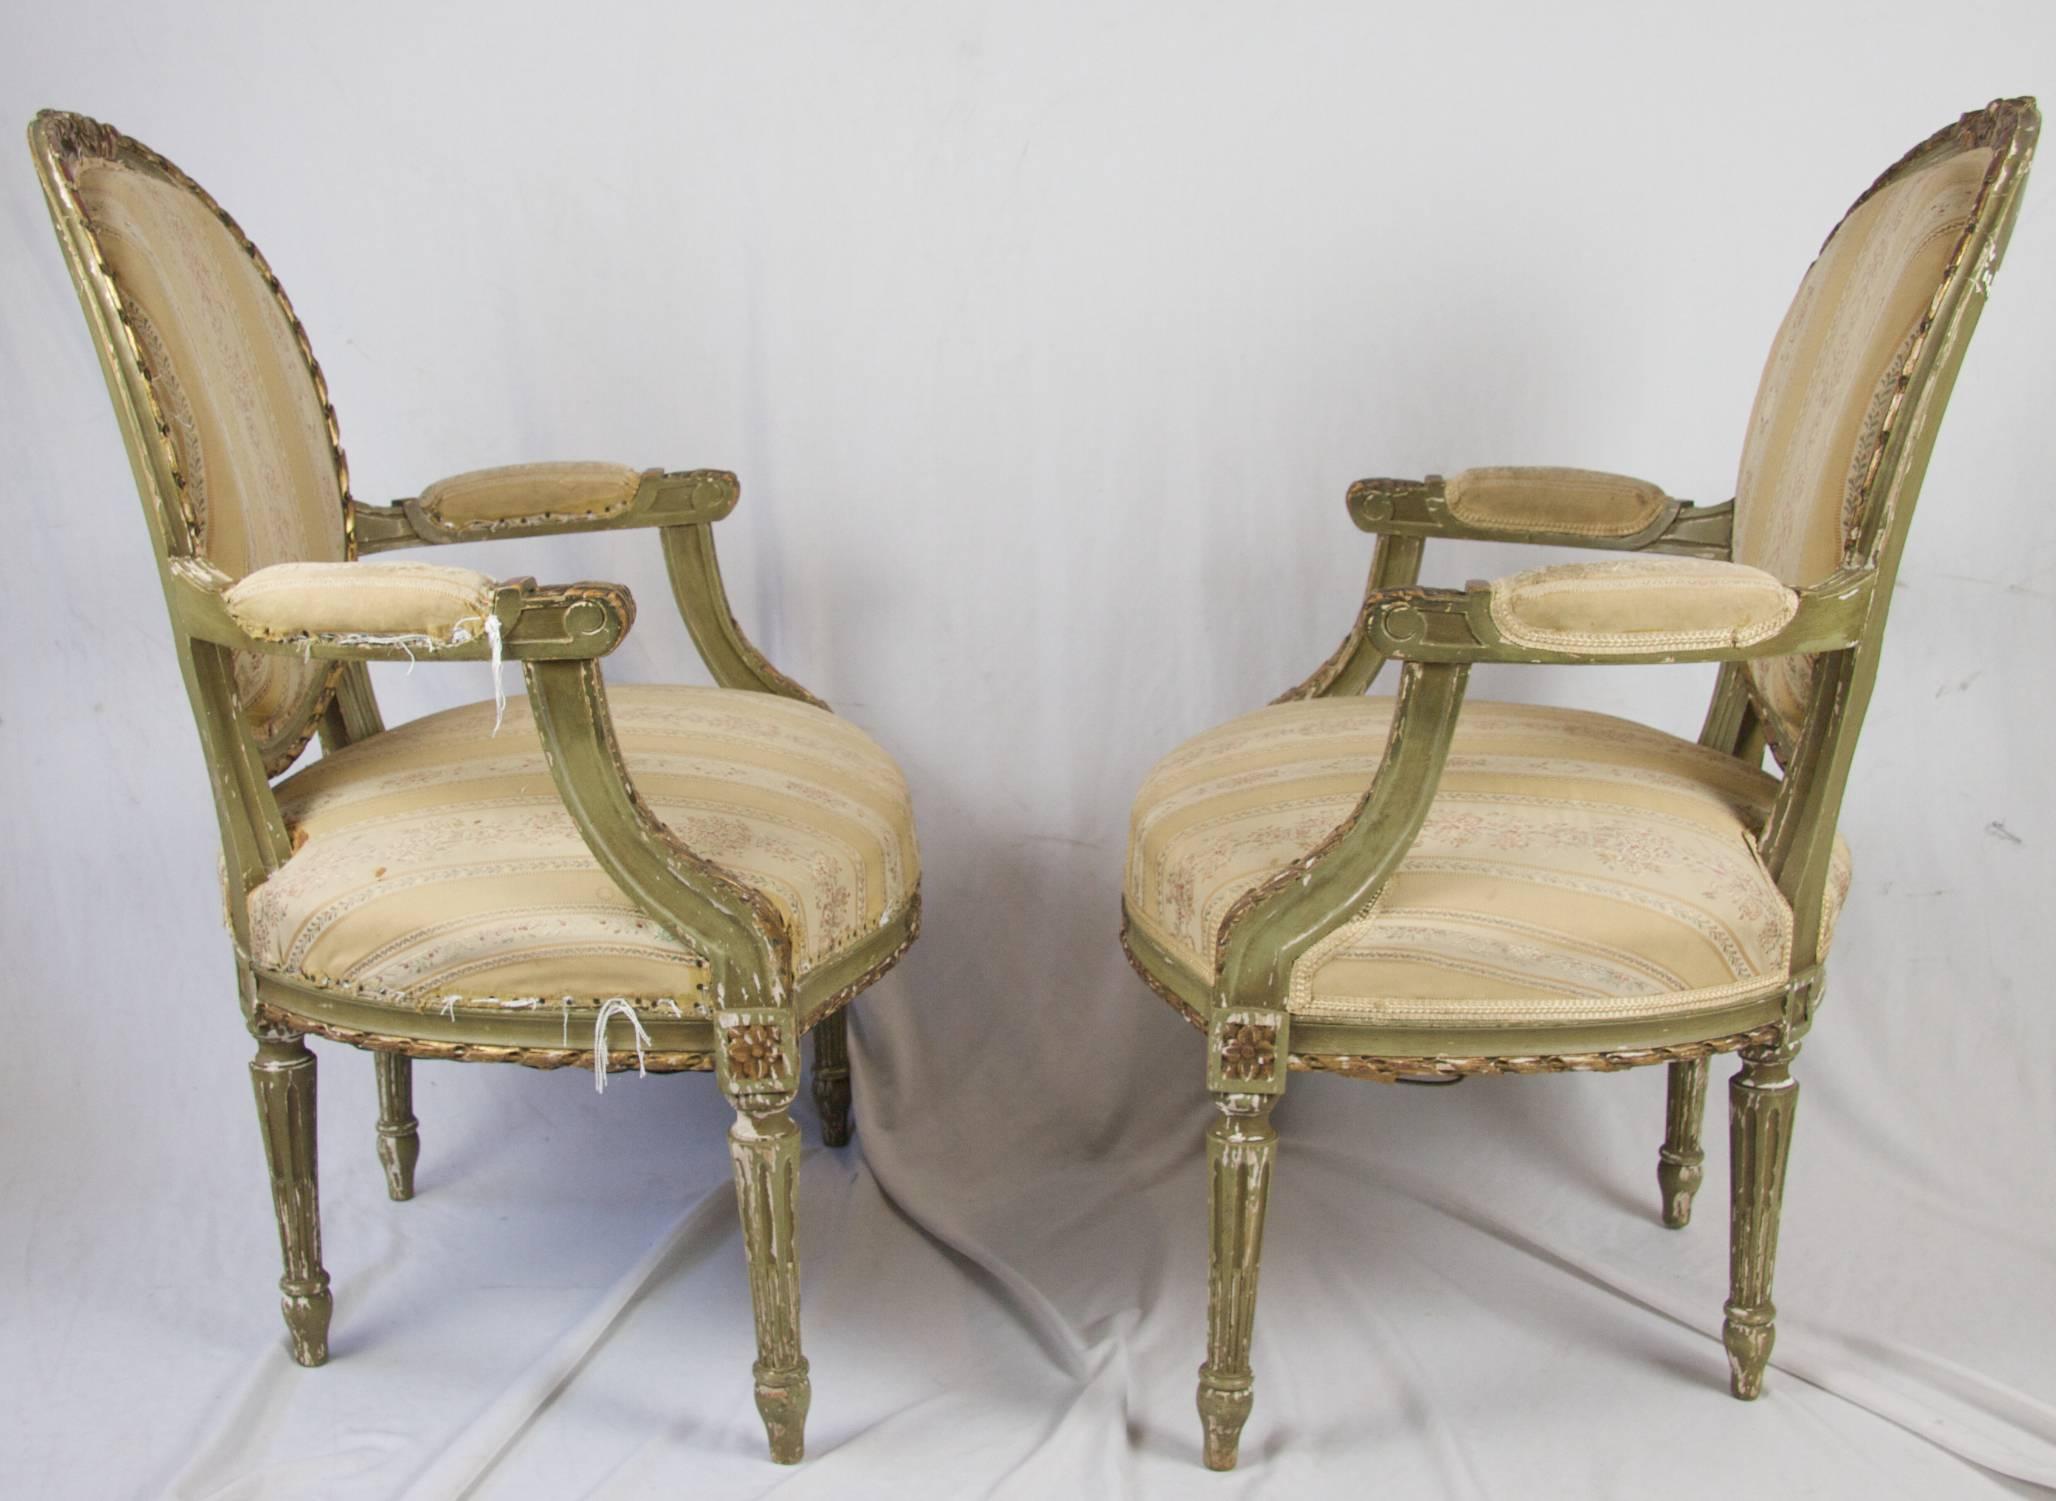 Very beautiful unusual Swedish antique Gustavian carver chairs intricately decorated with carved canework, acanthus leaf motifs and bow carvings.

Super comfy fully sprung seats and webbed back. Original gilt finish has developed a lovely patina